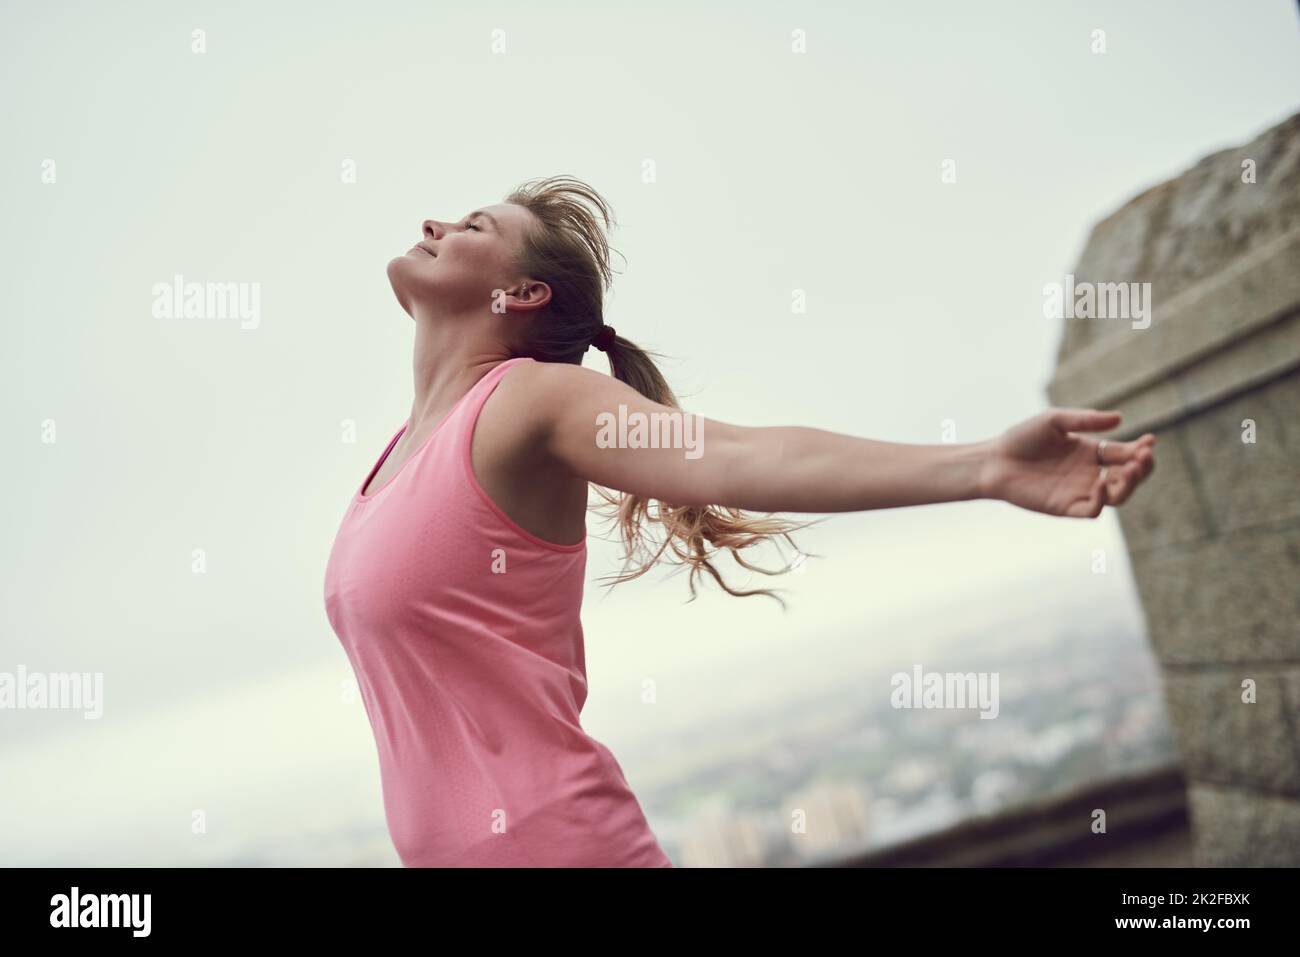 Nothing feels better than fitness. Shot of a happy young woman feeling free while out for a run in the city. Stock Photo